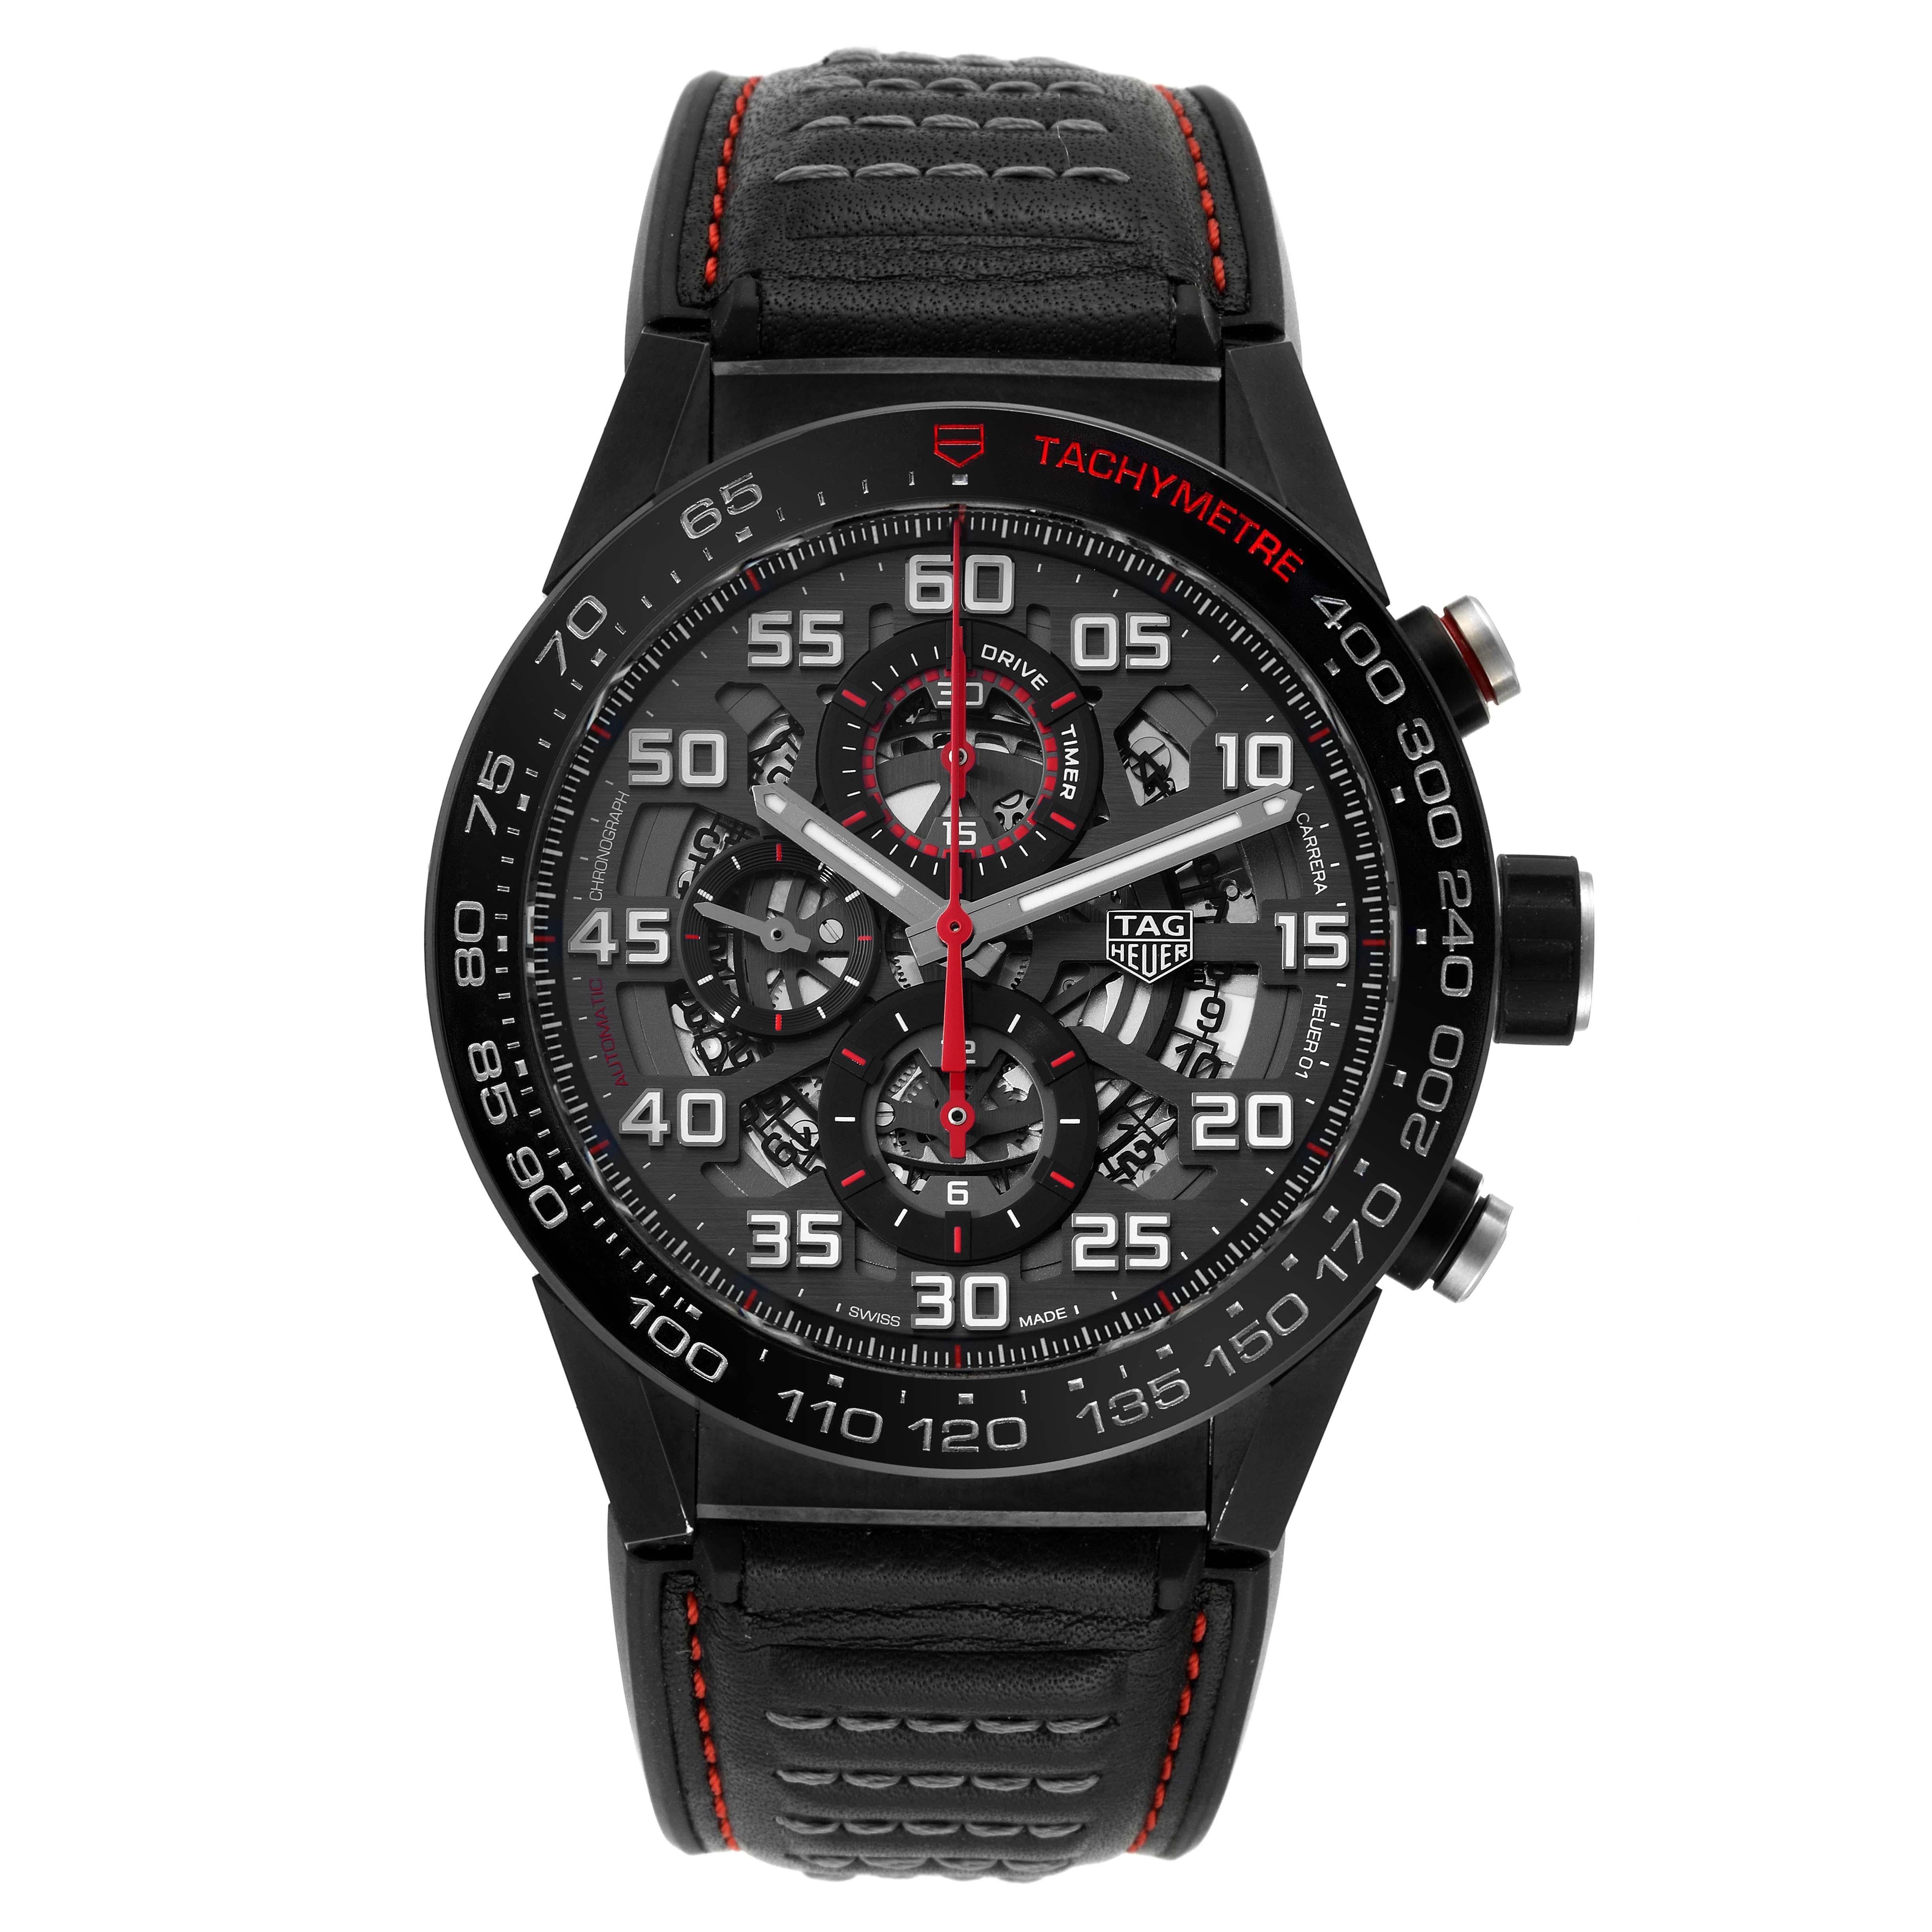 TAG Heuer Carrera Calibre 01 Skeleton Mens Watch CAR2A1H Box Card. Automatic self-winding chronograph movement. Black PVD coated stainless steel case 45 mm. Case thickness: 16.5 mm. Transparent exhibition sapphire crystal caseback. Satin finished